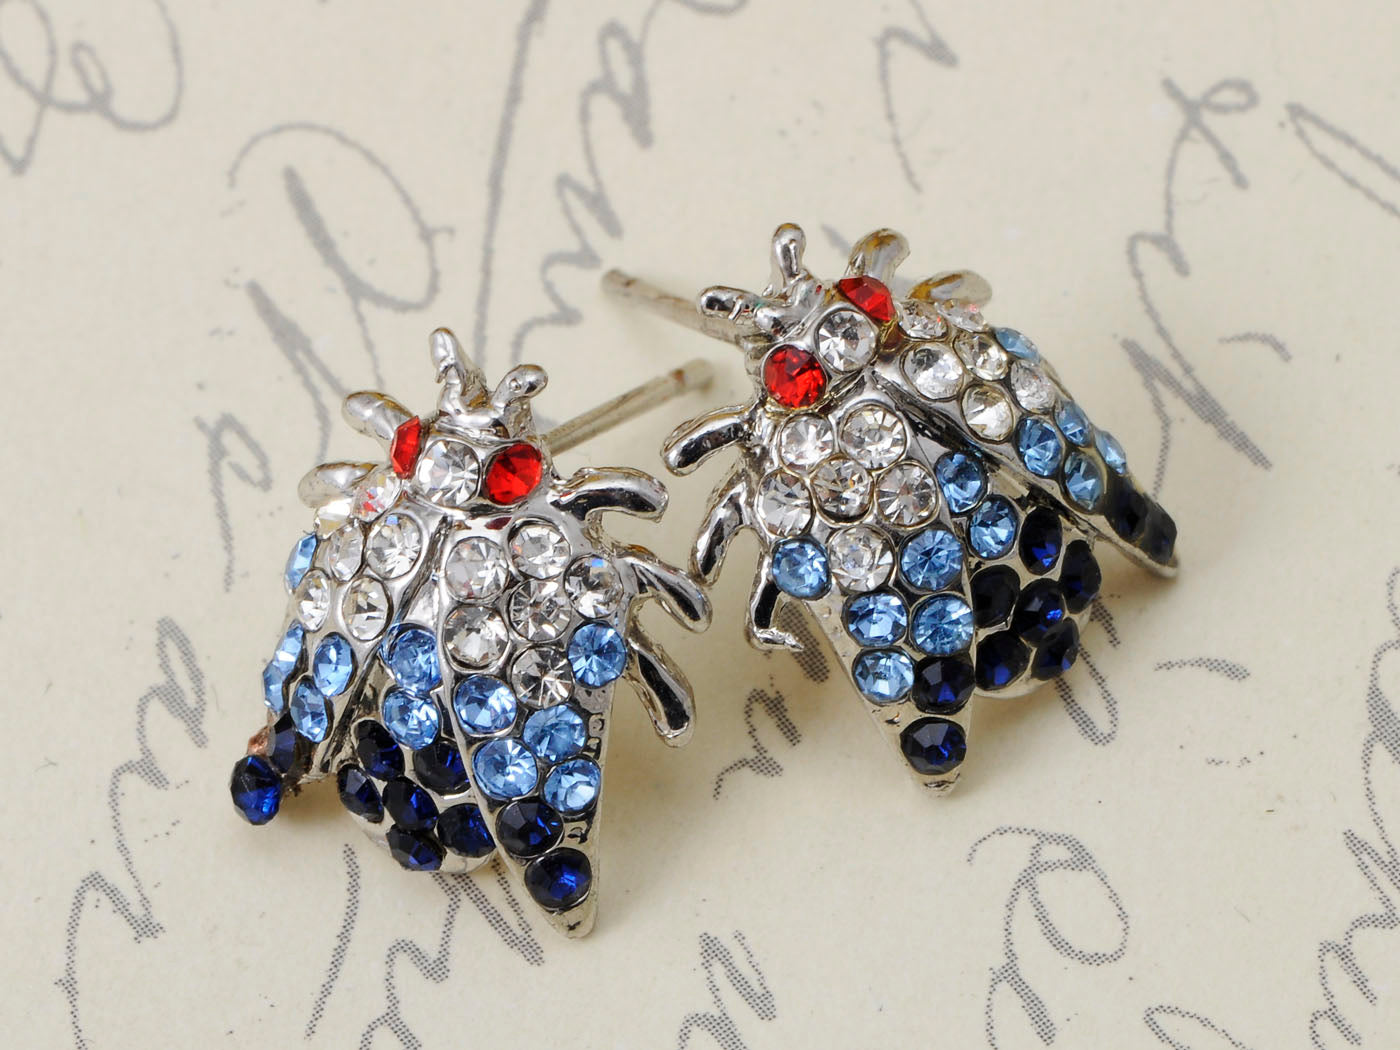 Insect House Fly Beetle Creature Element Earrings